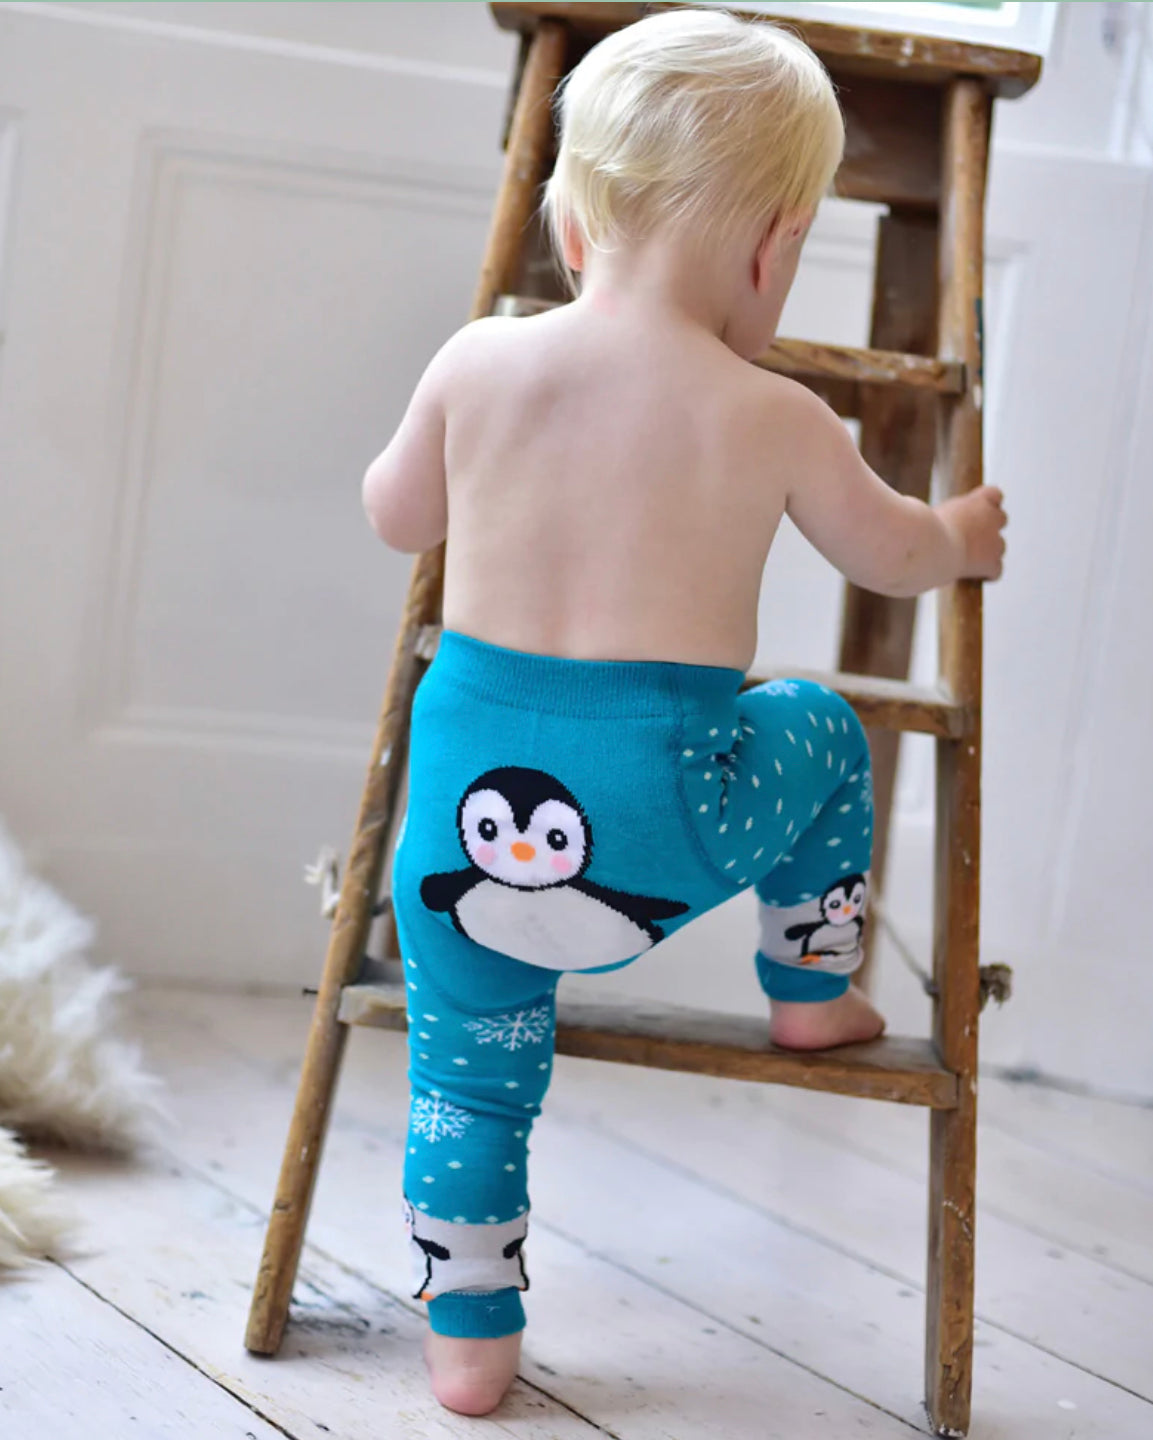 Child Green Footless Tights